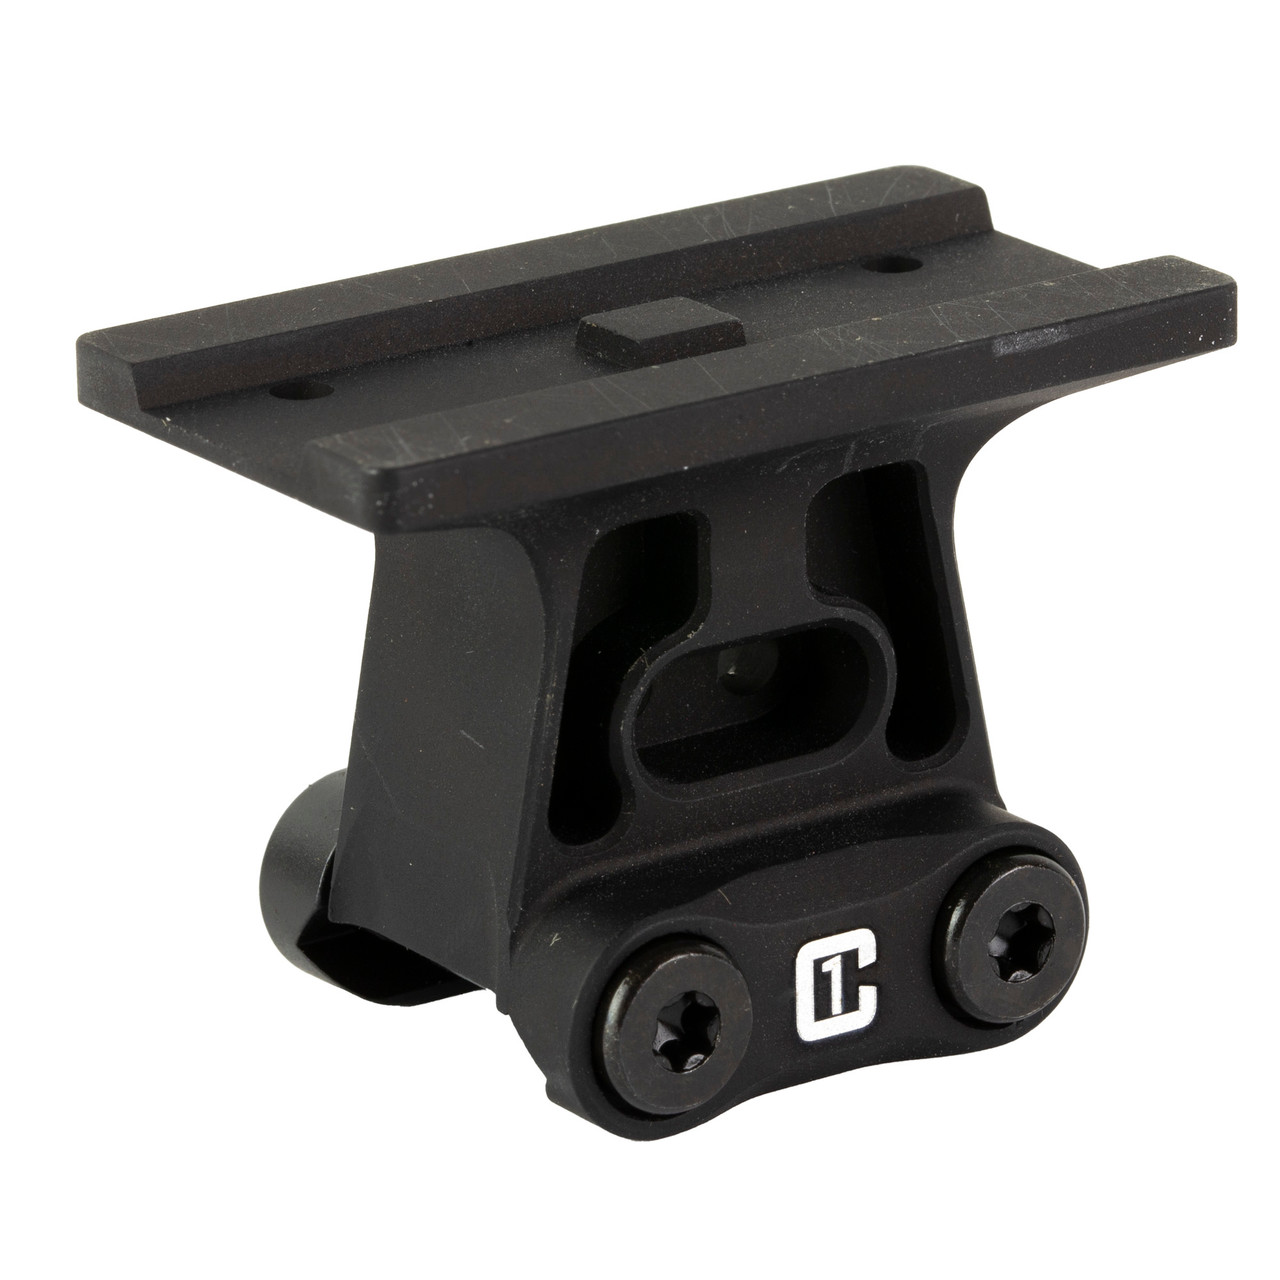 Badger Cond One T2 Mount 1.70" Blk